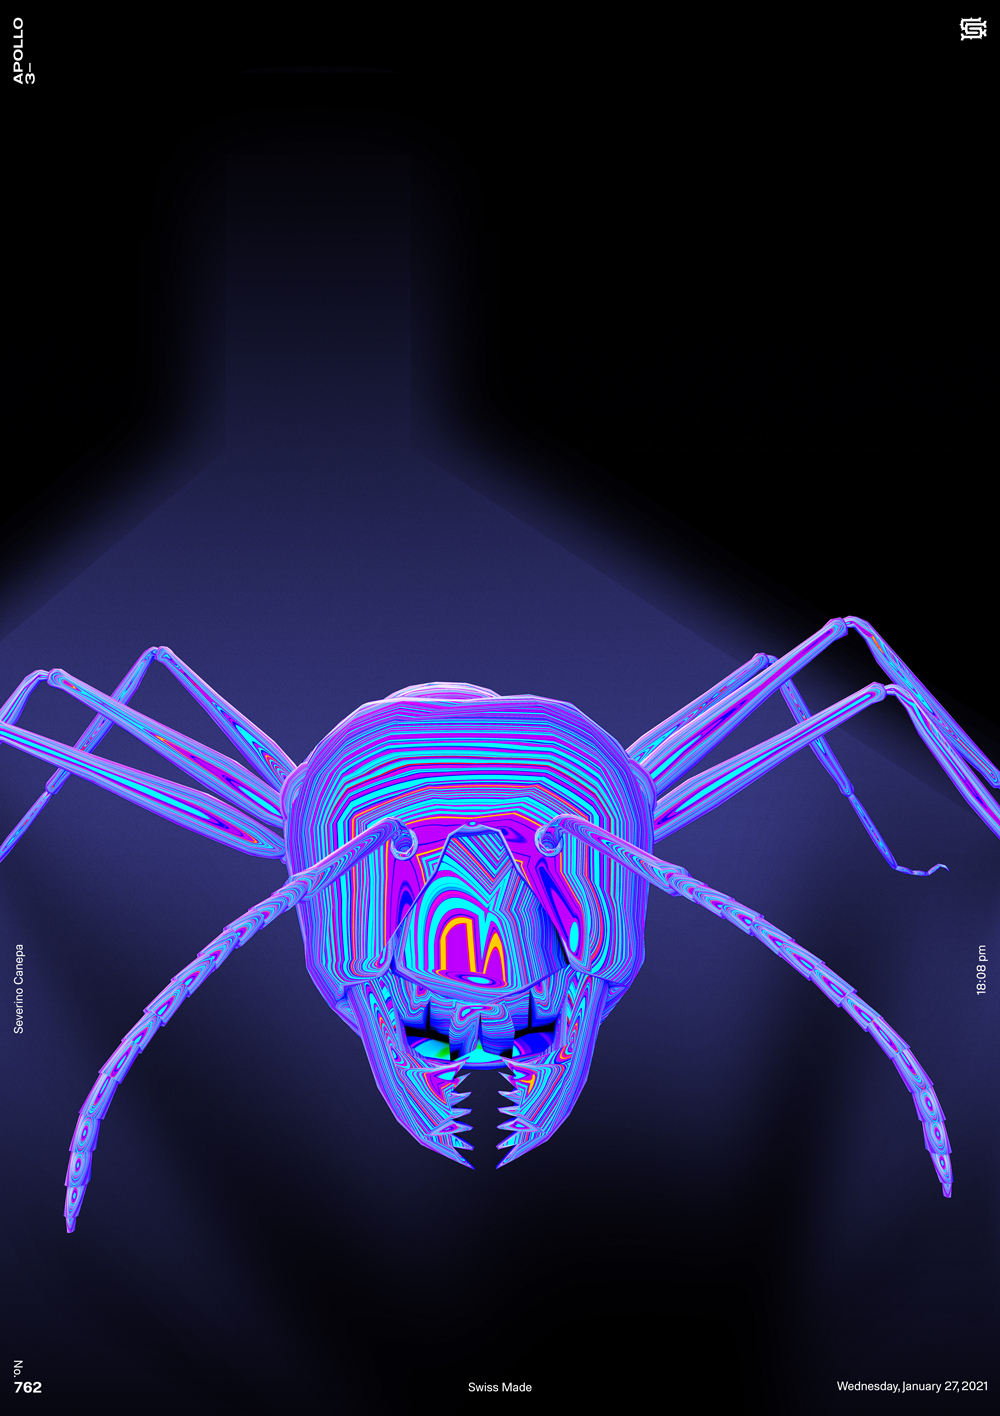 Poster design made with a 3D iridescent Ant and vector shapes in Photoshop